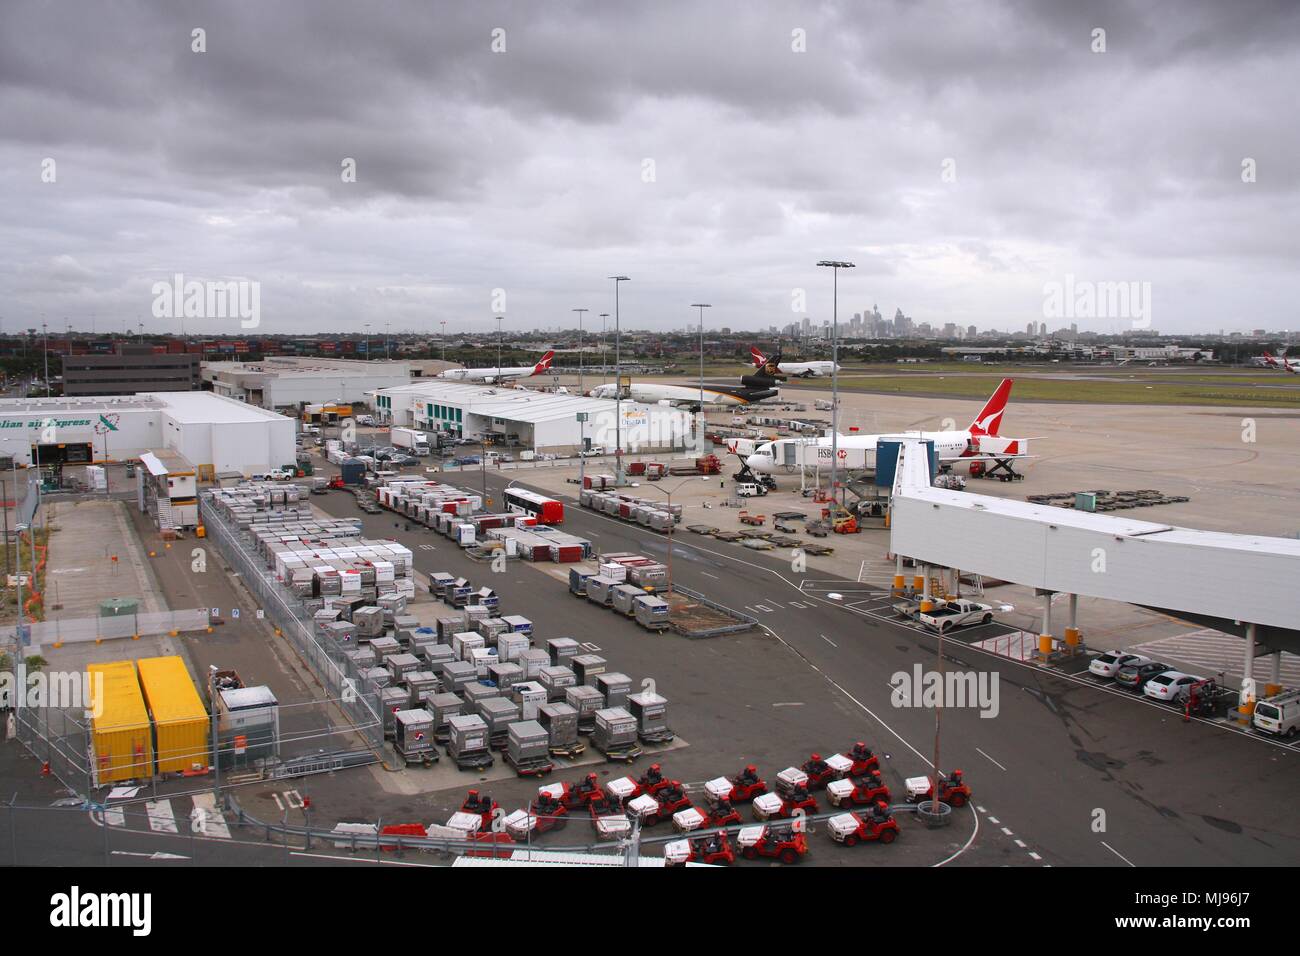 SYDNEY, AUSTRALIA - FEBRUARY 15, 2008:  Ground handling area at Sydney Kingsford Smith Airport. The airport handled 327,190 aircraft movements in FY 2 Stock Photo